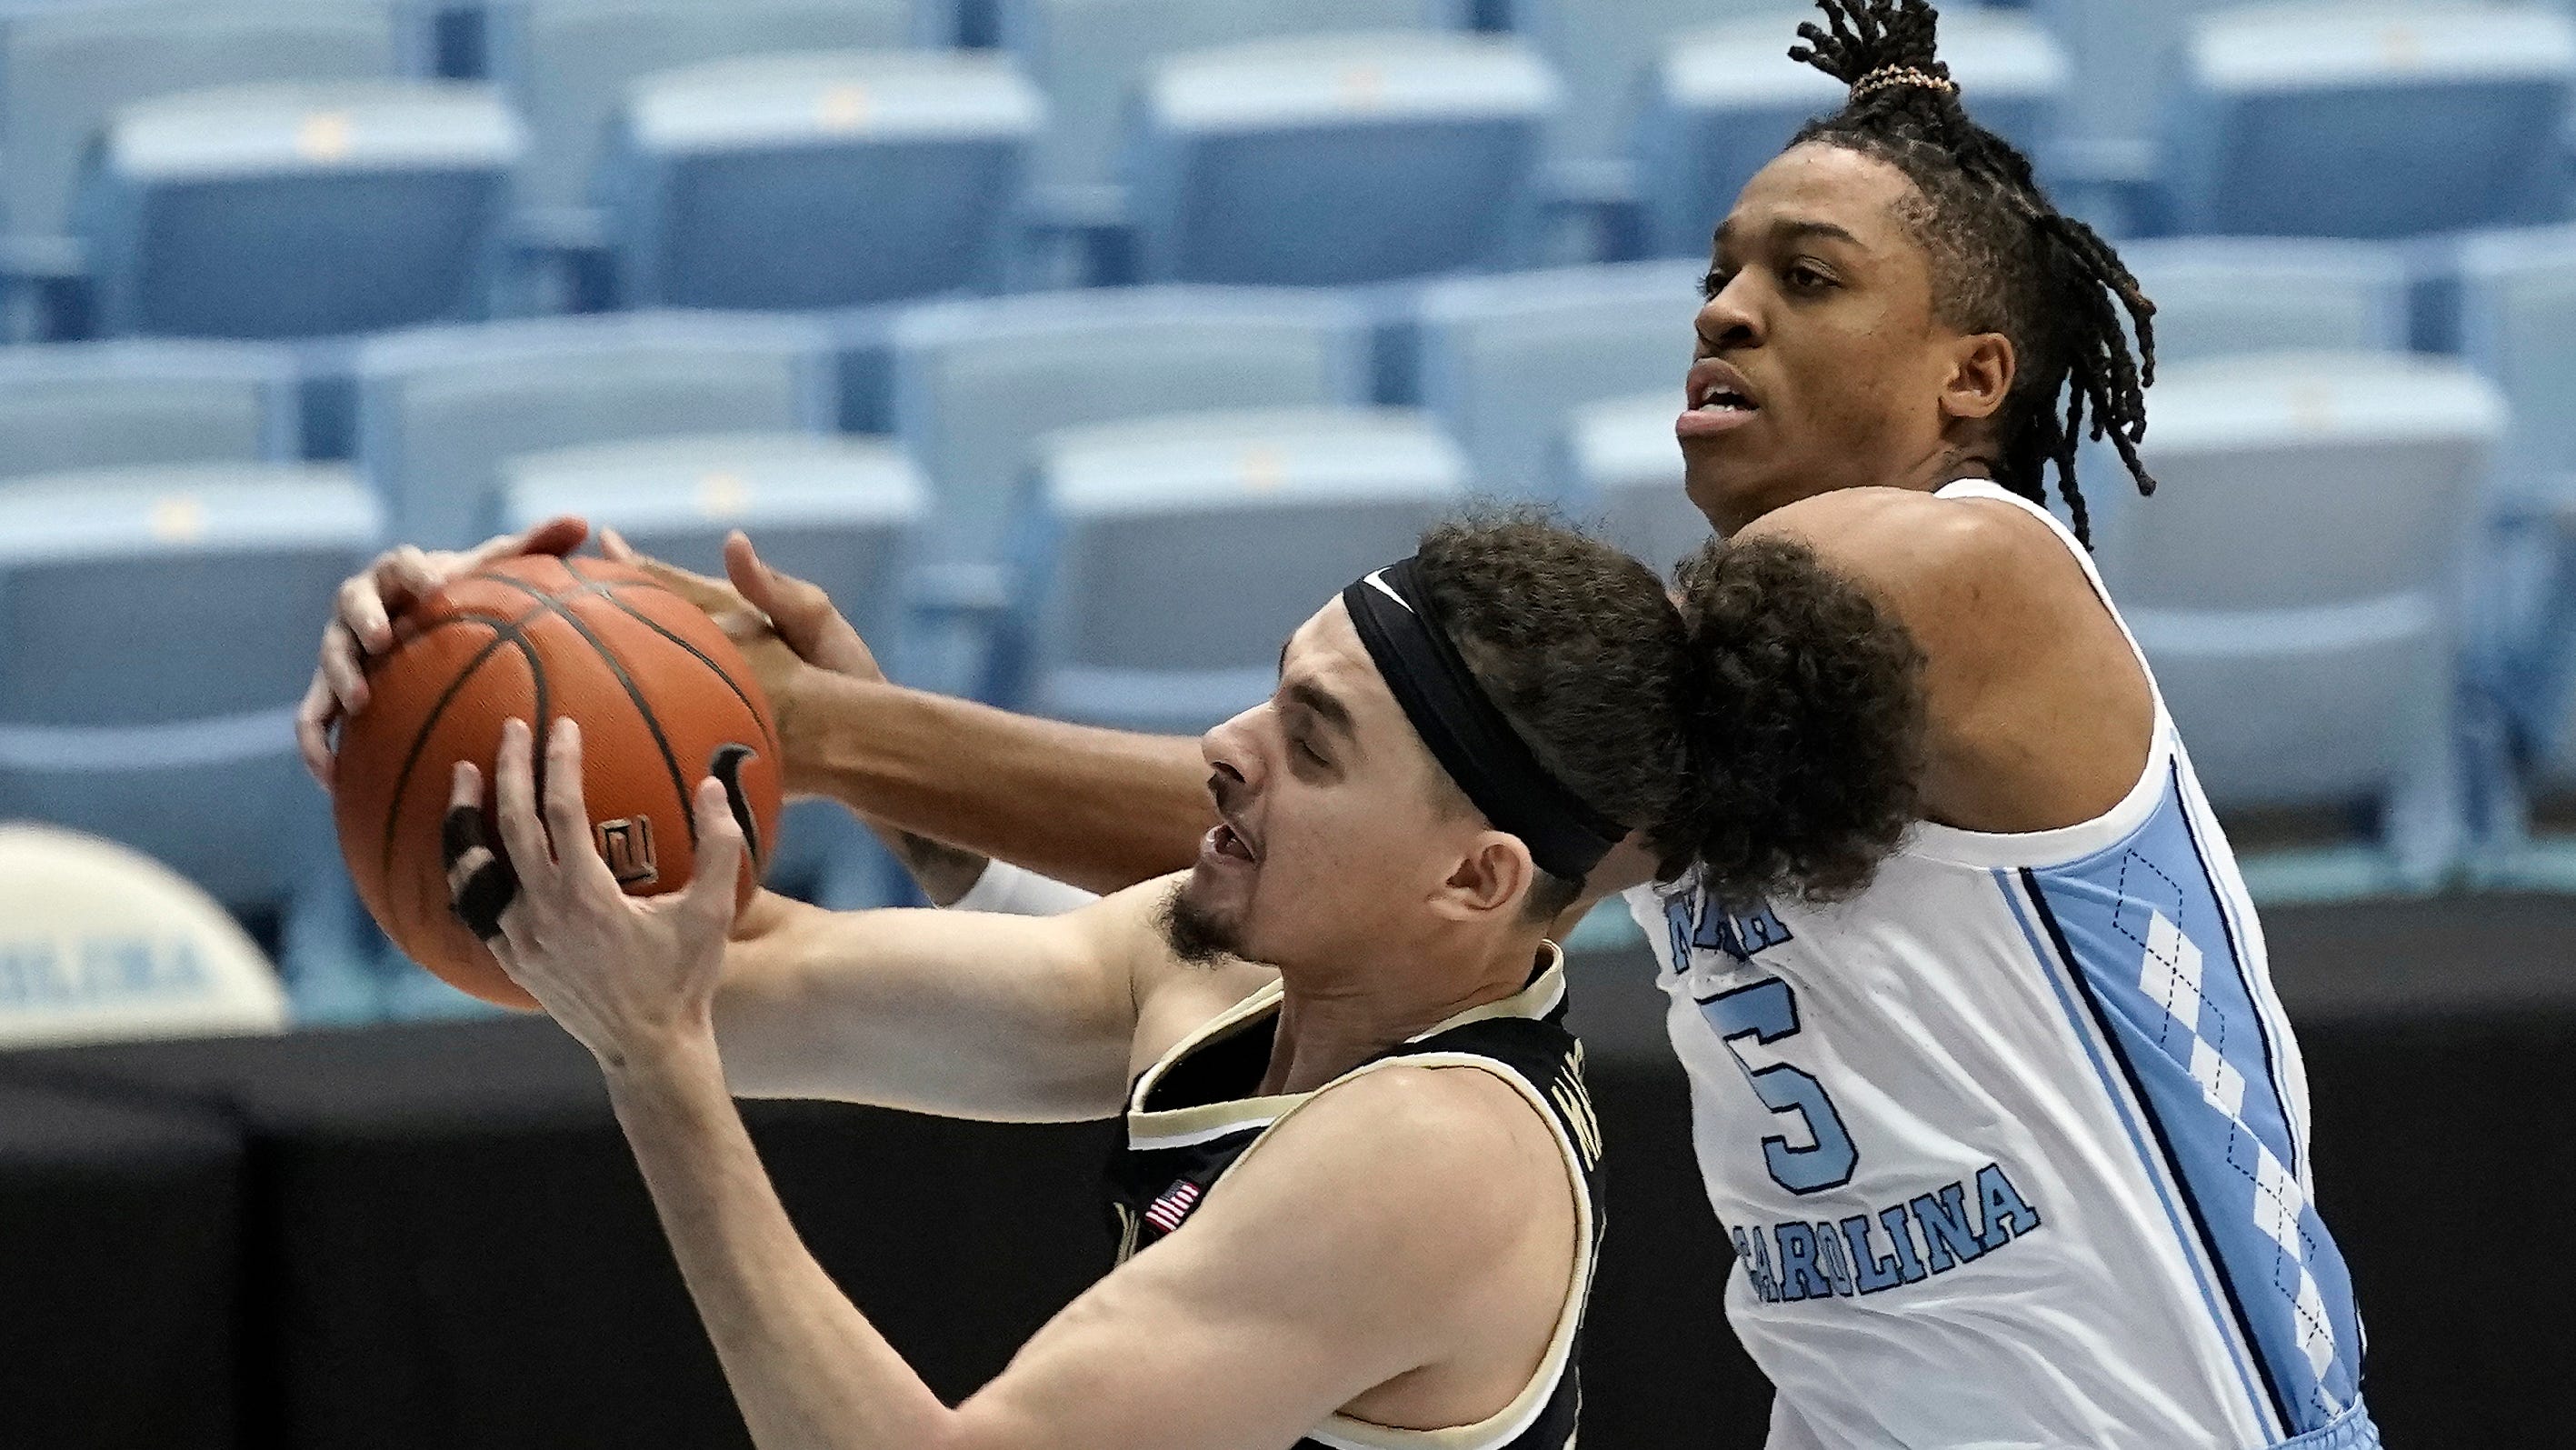 Tar Heels see improvements, hope to find higher gear moving forward